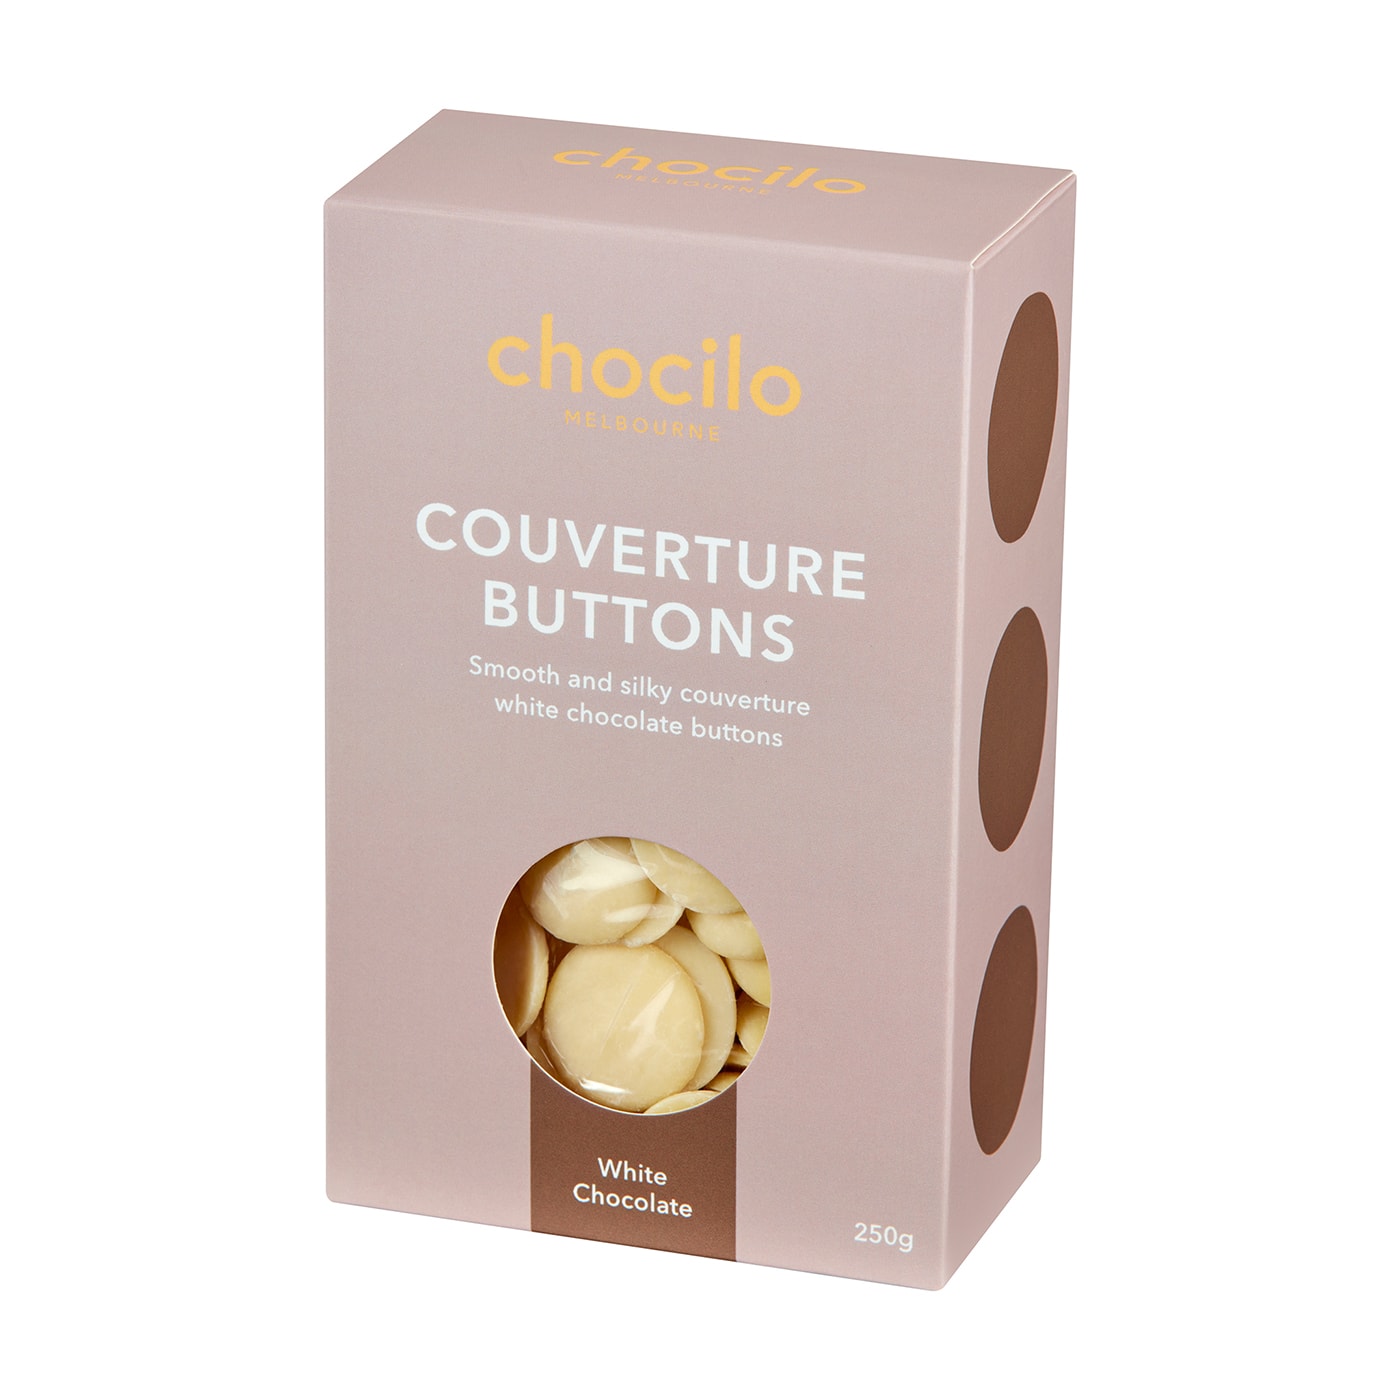 Couverture White Chocolate Buttons Gift Box 250g